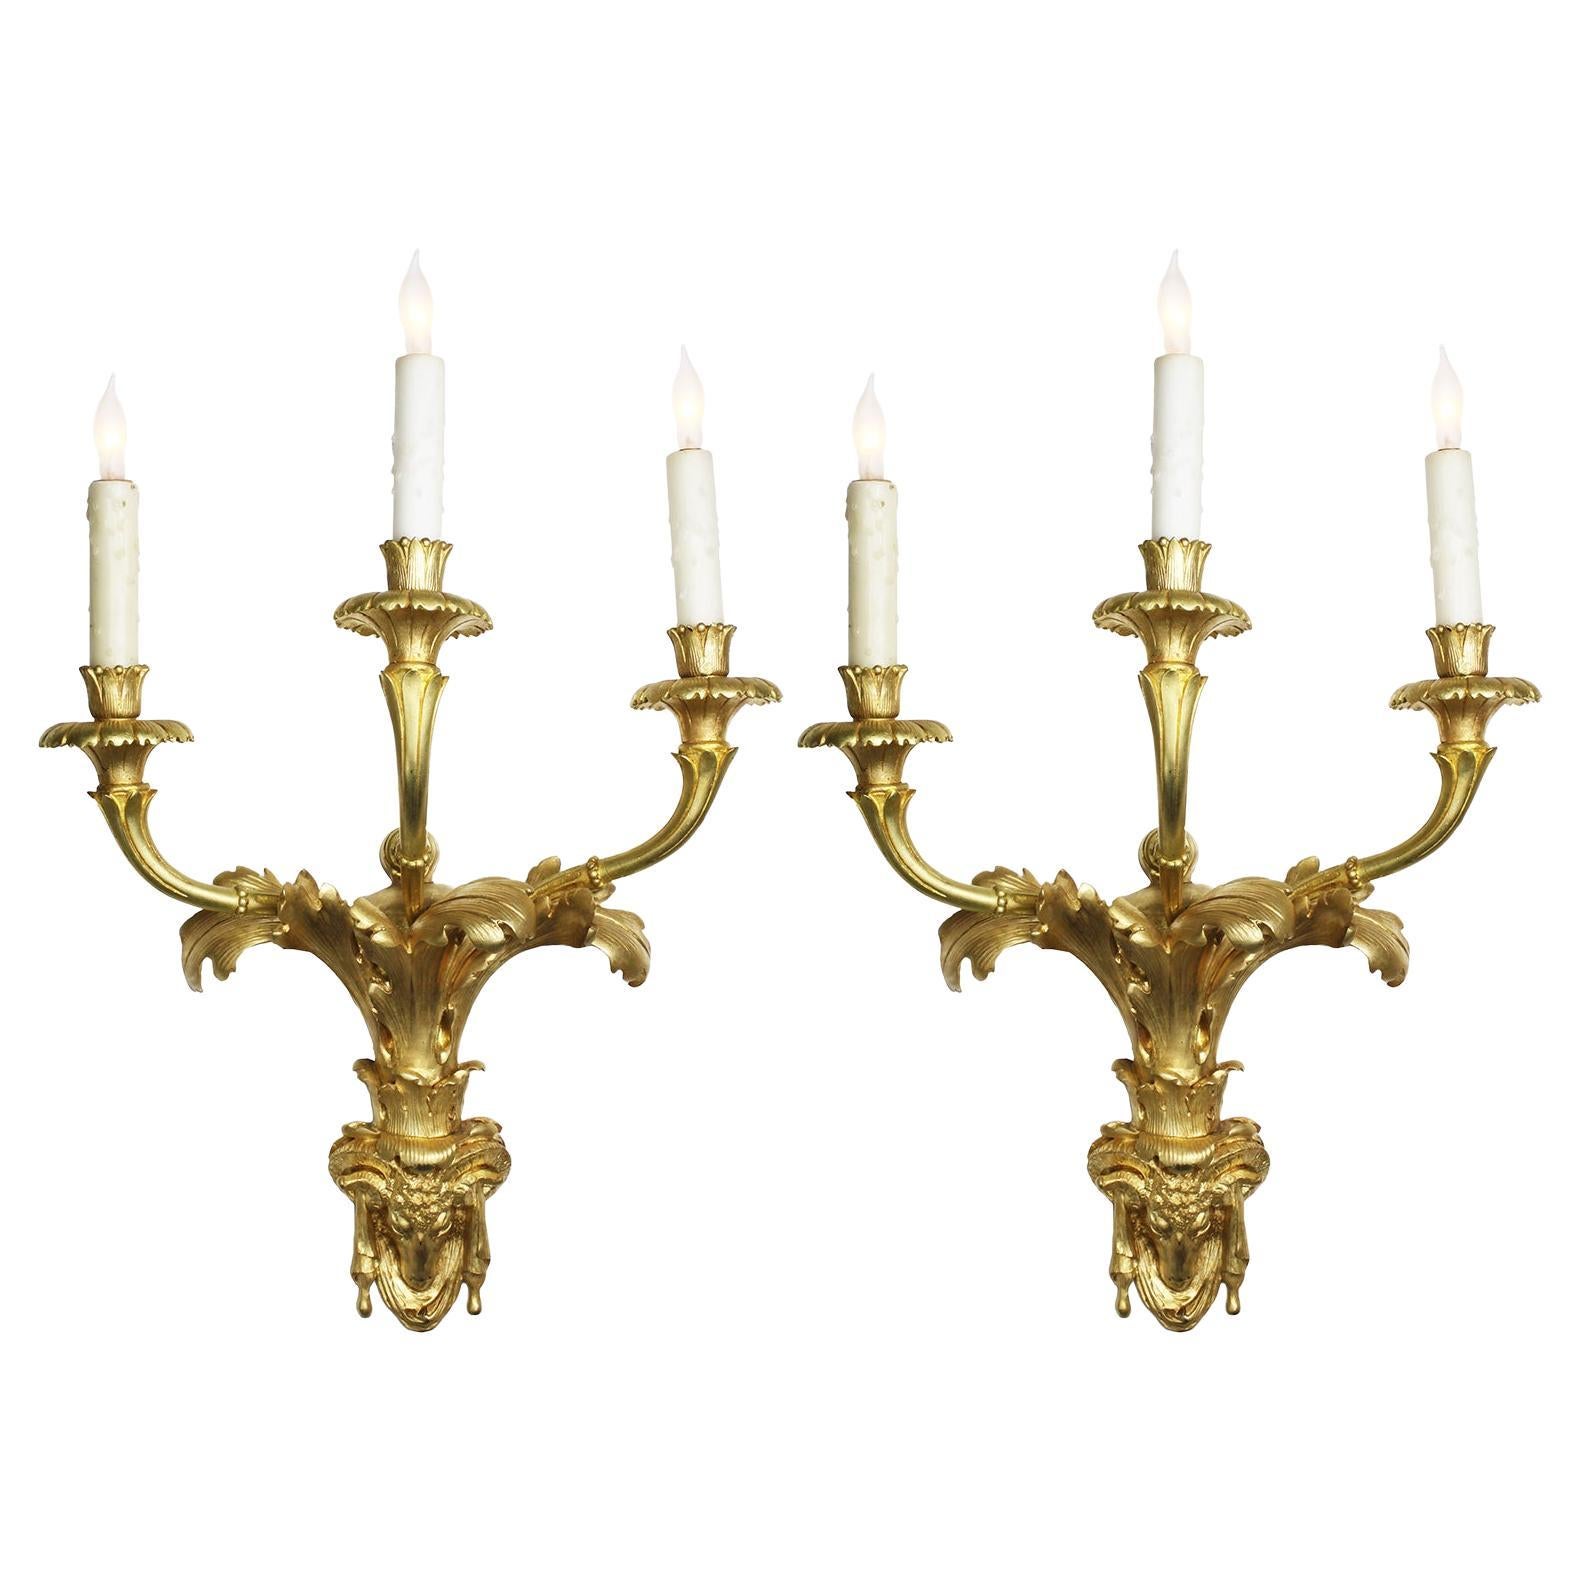 Pair French 19th Century Régence Style 3-Light Gilt-Bronze Wall Lights Sconces